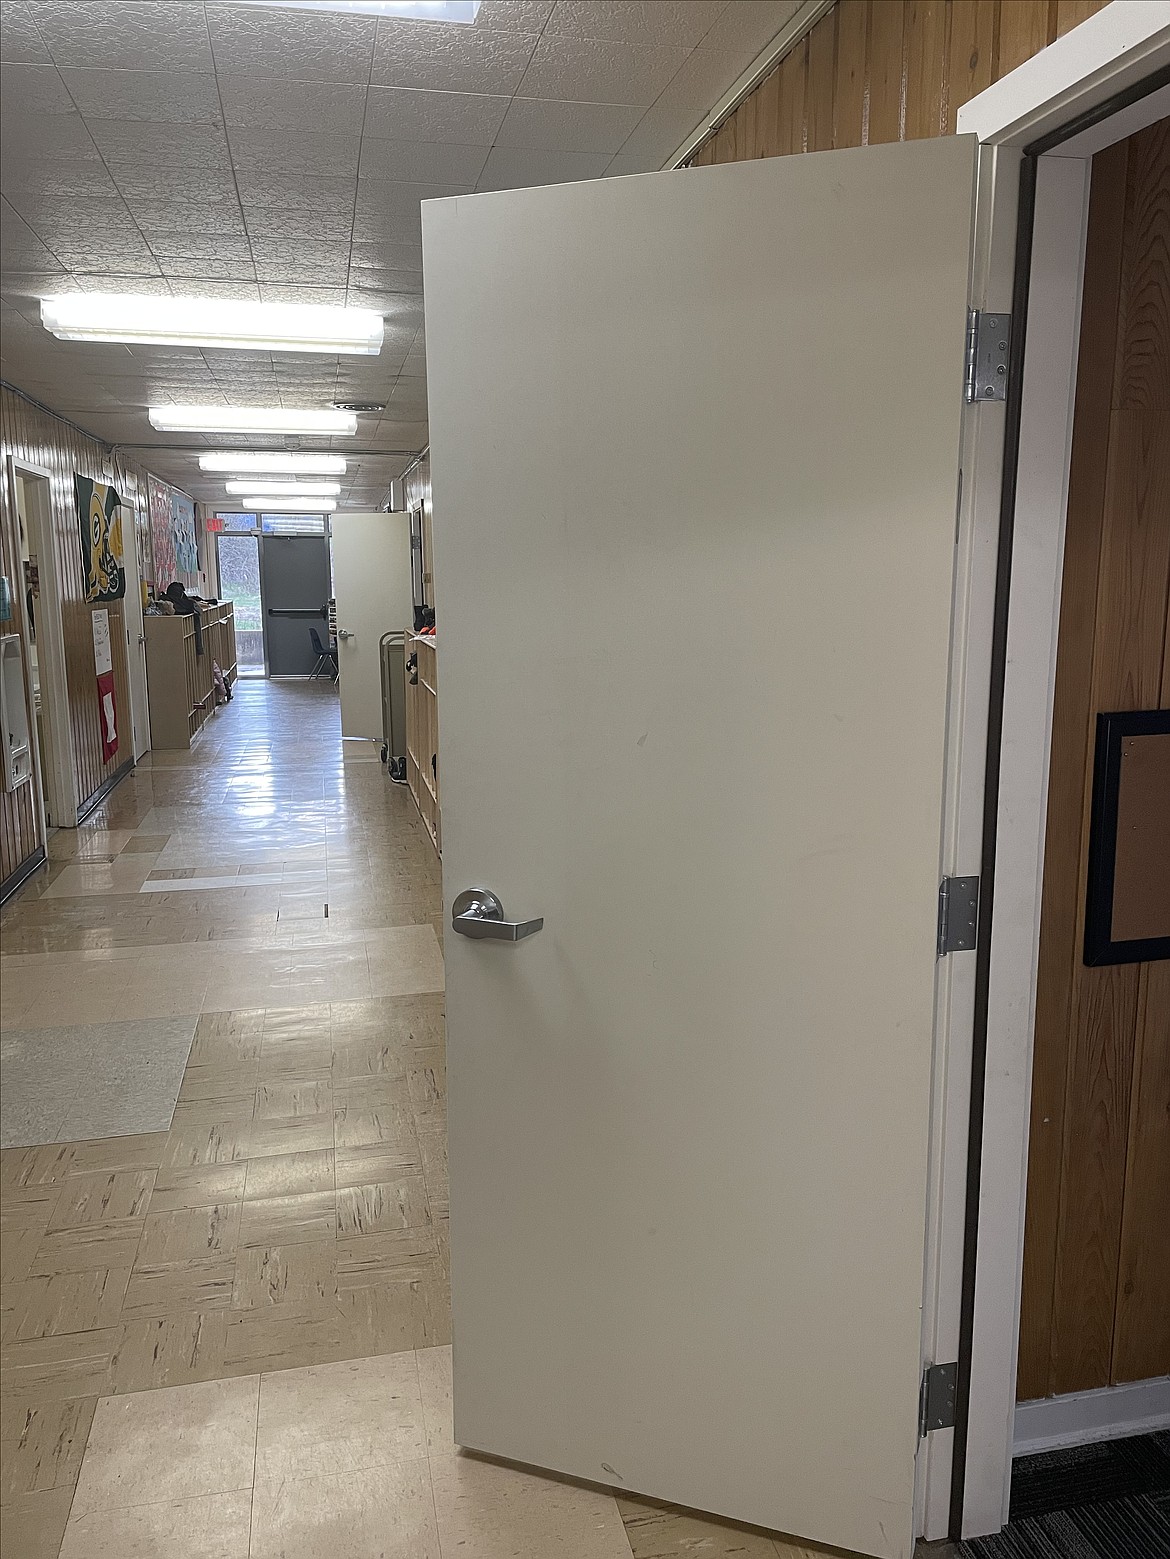 Solid fire-rated doors are now in use at Canyon Elementary School as a safety upgrade from the previous hollow wooden doors in the building. Solid doors are safer in the event of a fire.